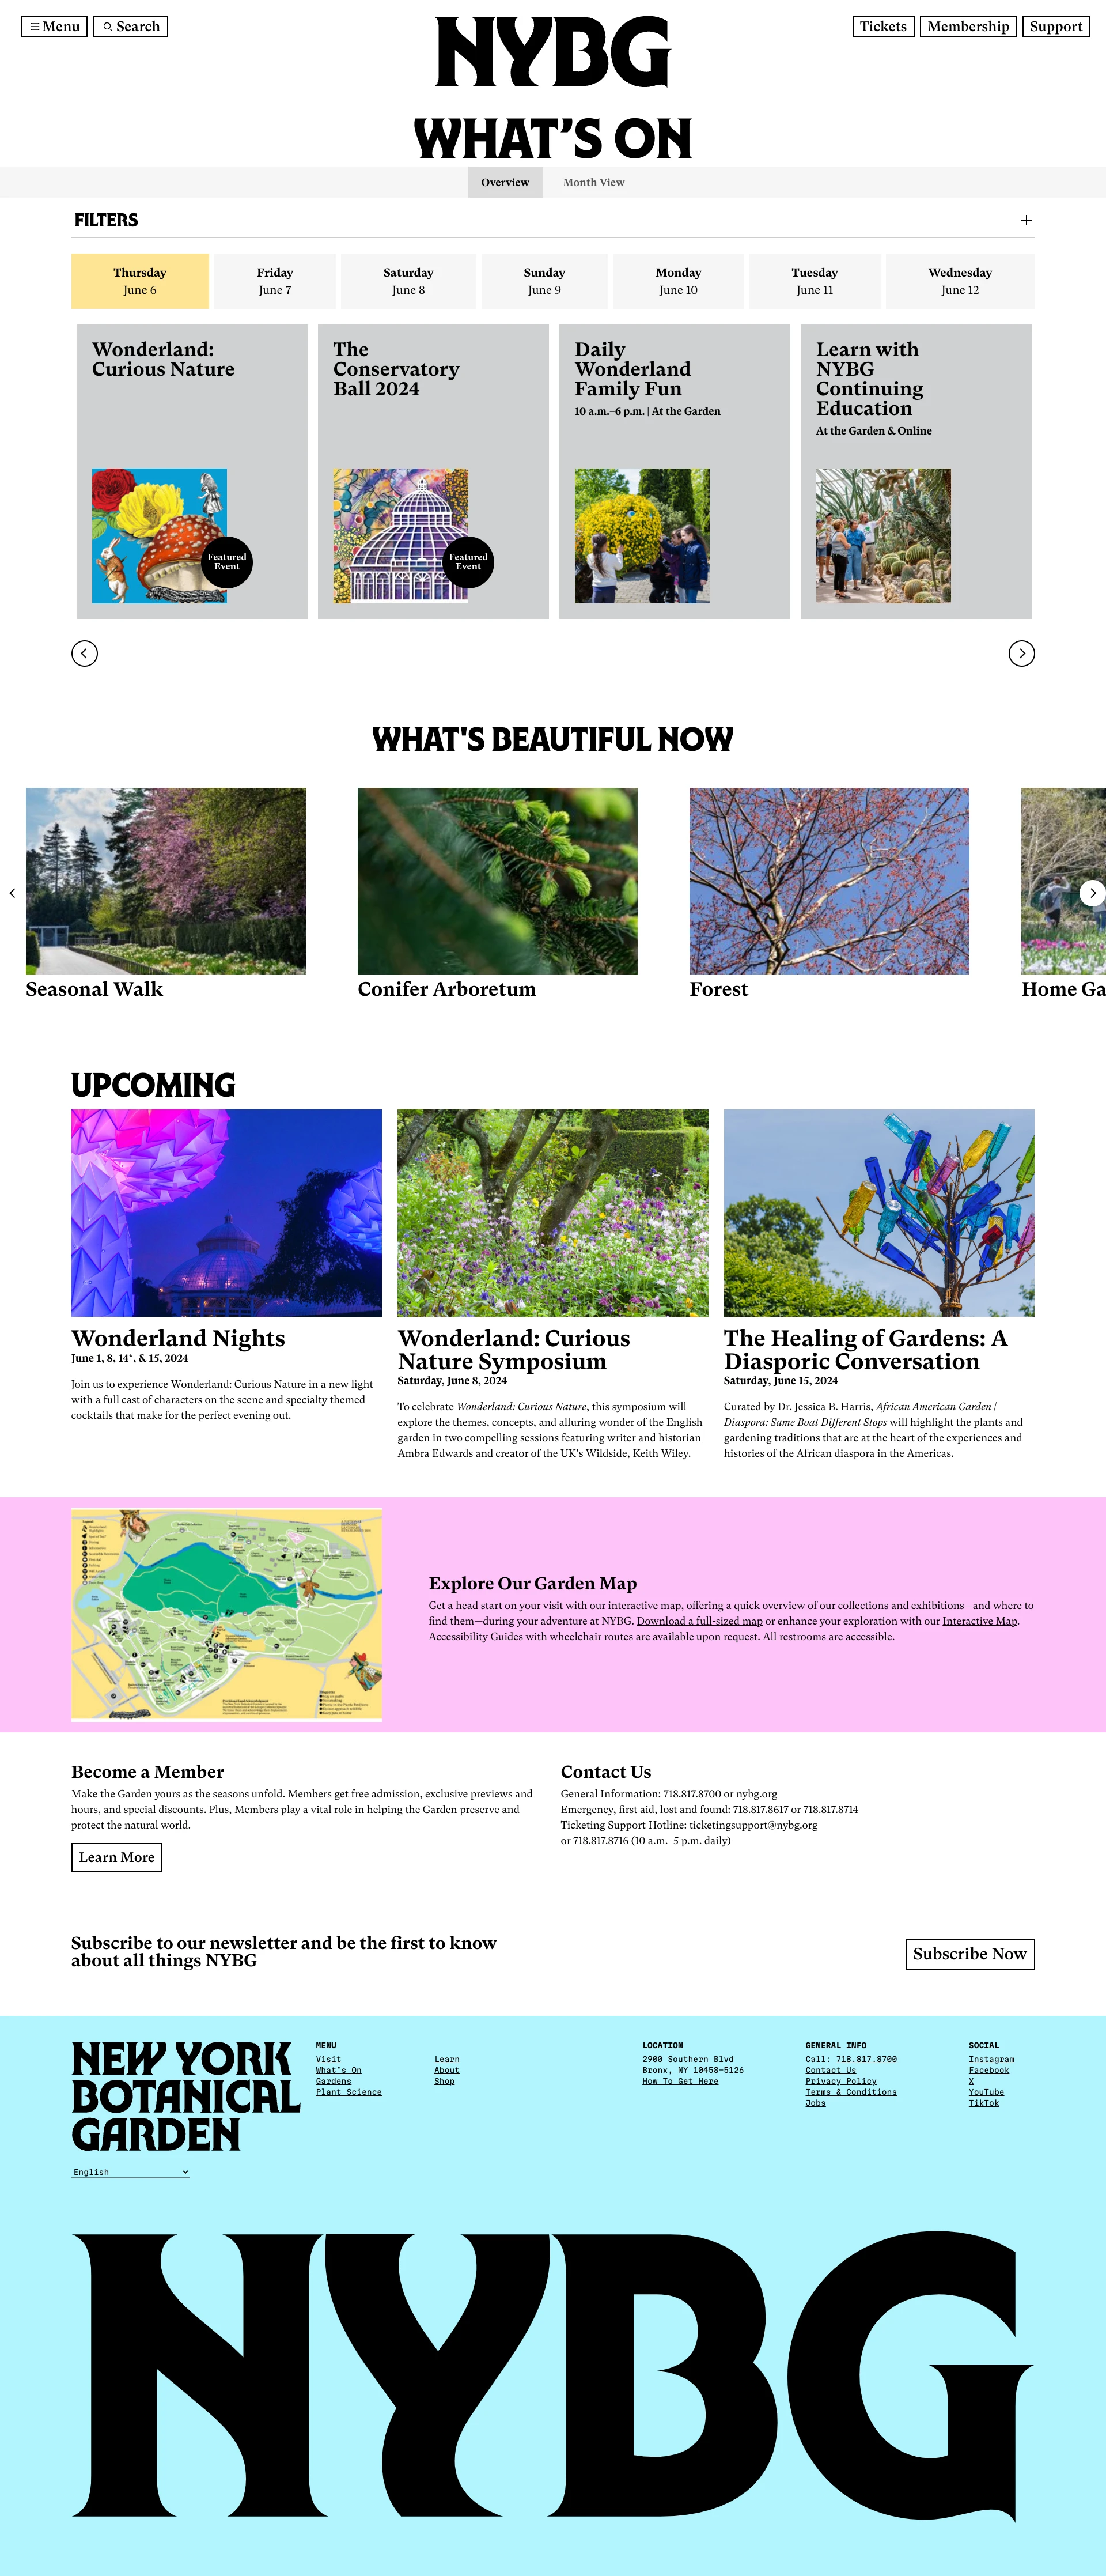 NYBG Landing Page Example: Experience The New York Botanical Garden, New York’s iconic living museum, educational institution, and cultural attraction.